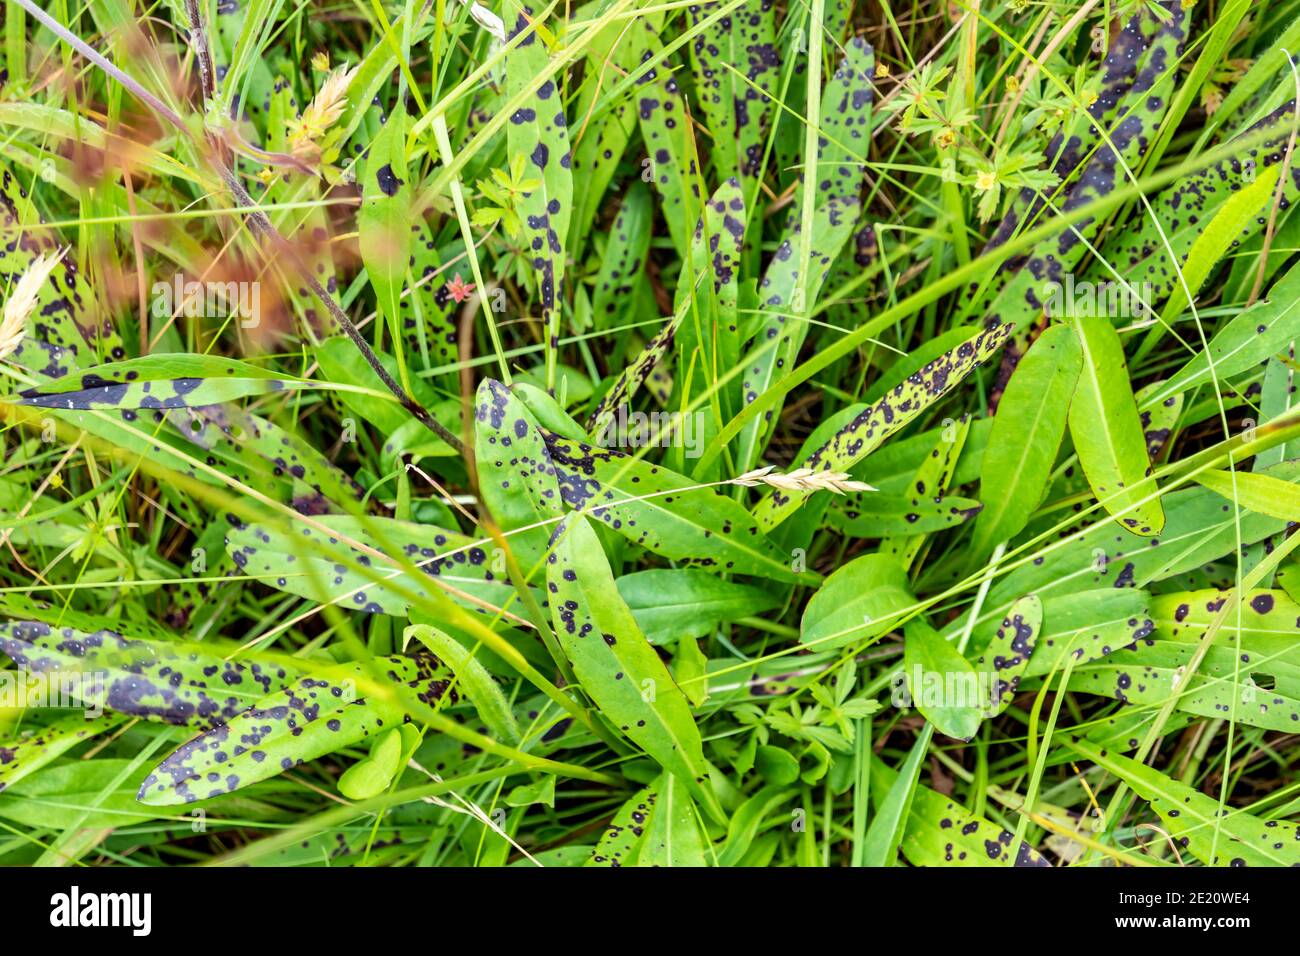 Black spot desease on leaves in County Donegal - Ireland. Stock Photo